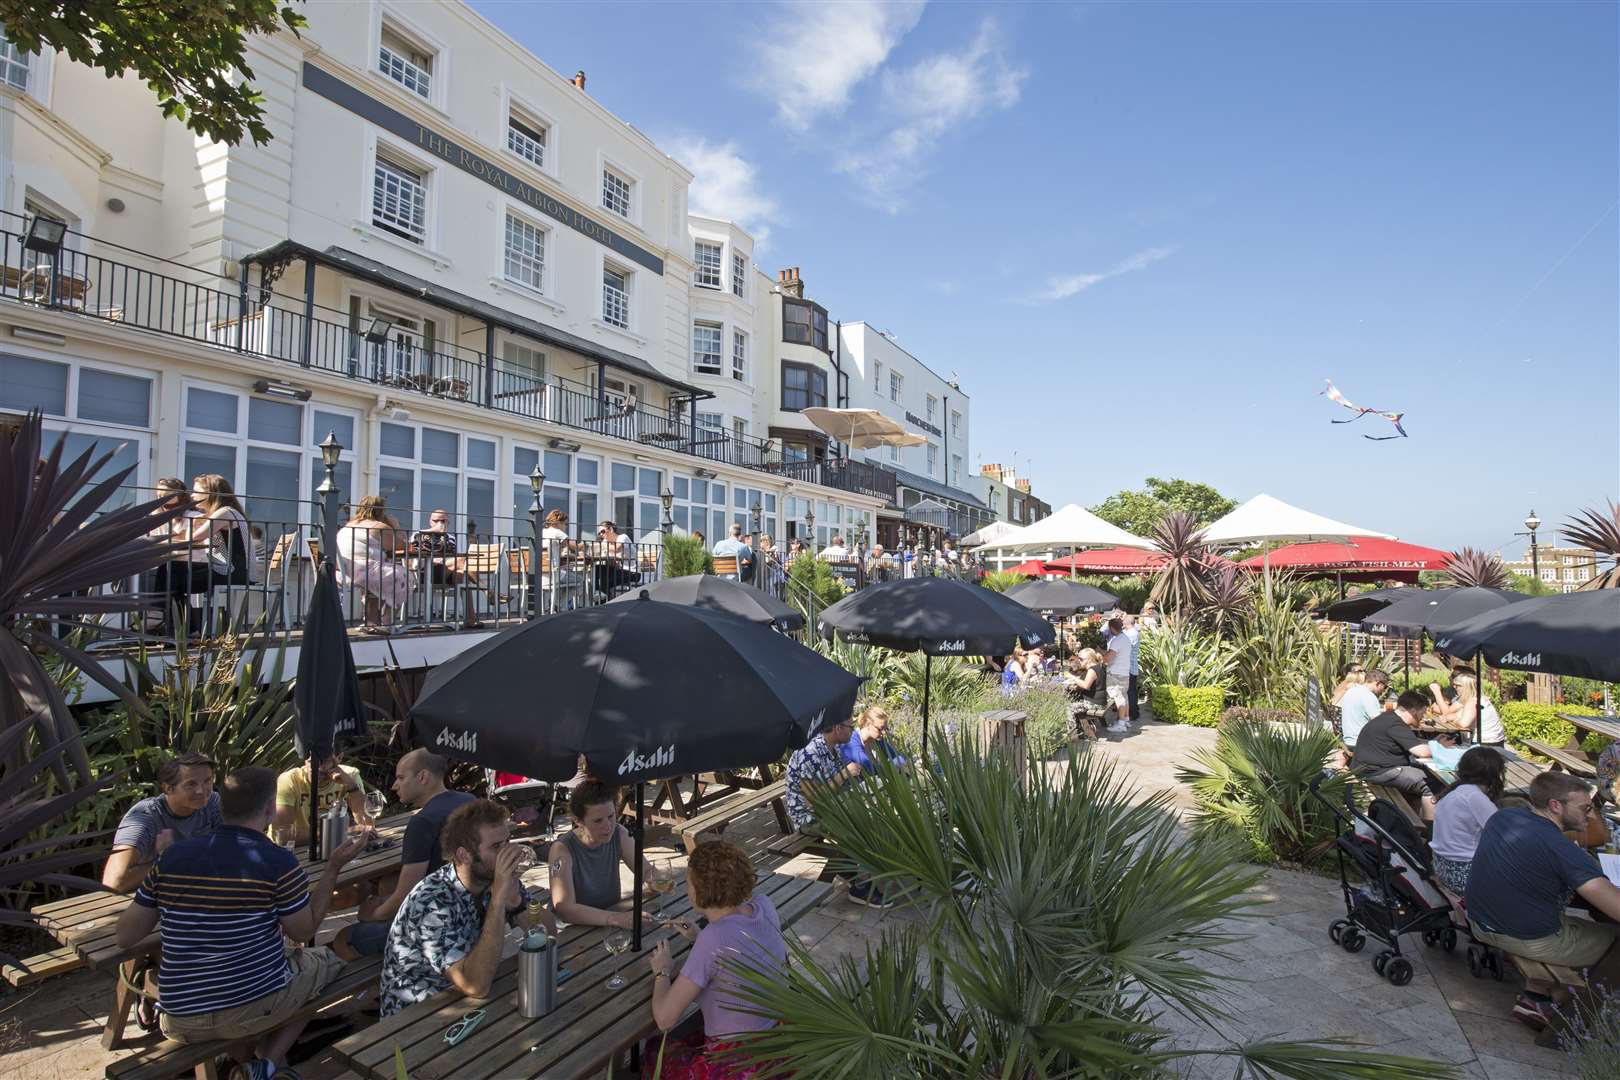 Shepherd Neame have submitted plans to revamp the seafront terrace at the Royal Albion Hotel in Broadstairs